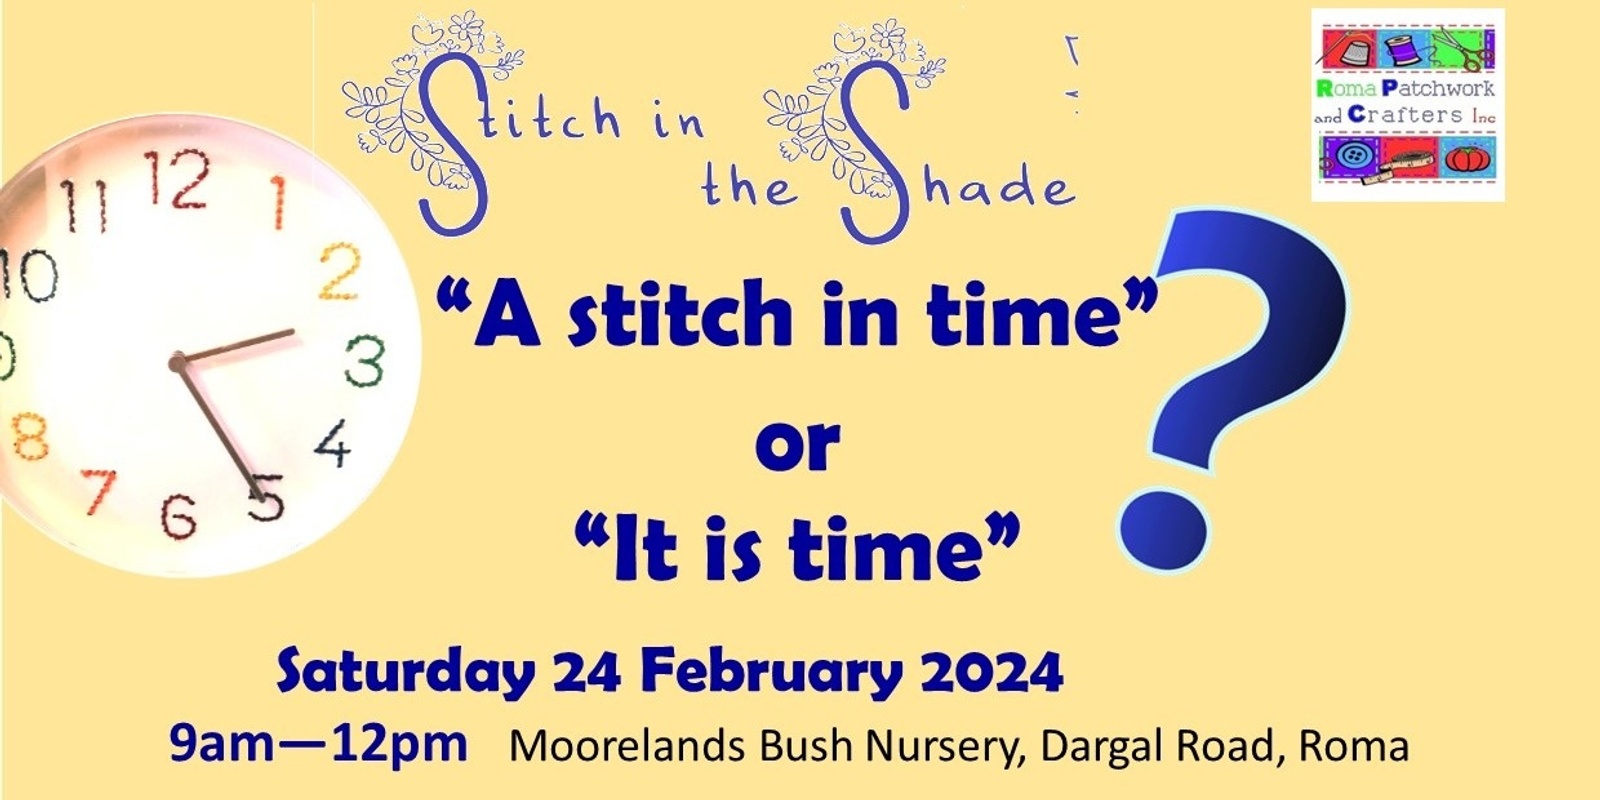 Banner image for A Stitch in Time - Stitch in the Shade